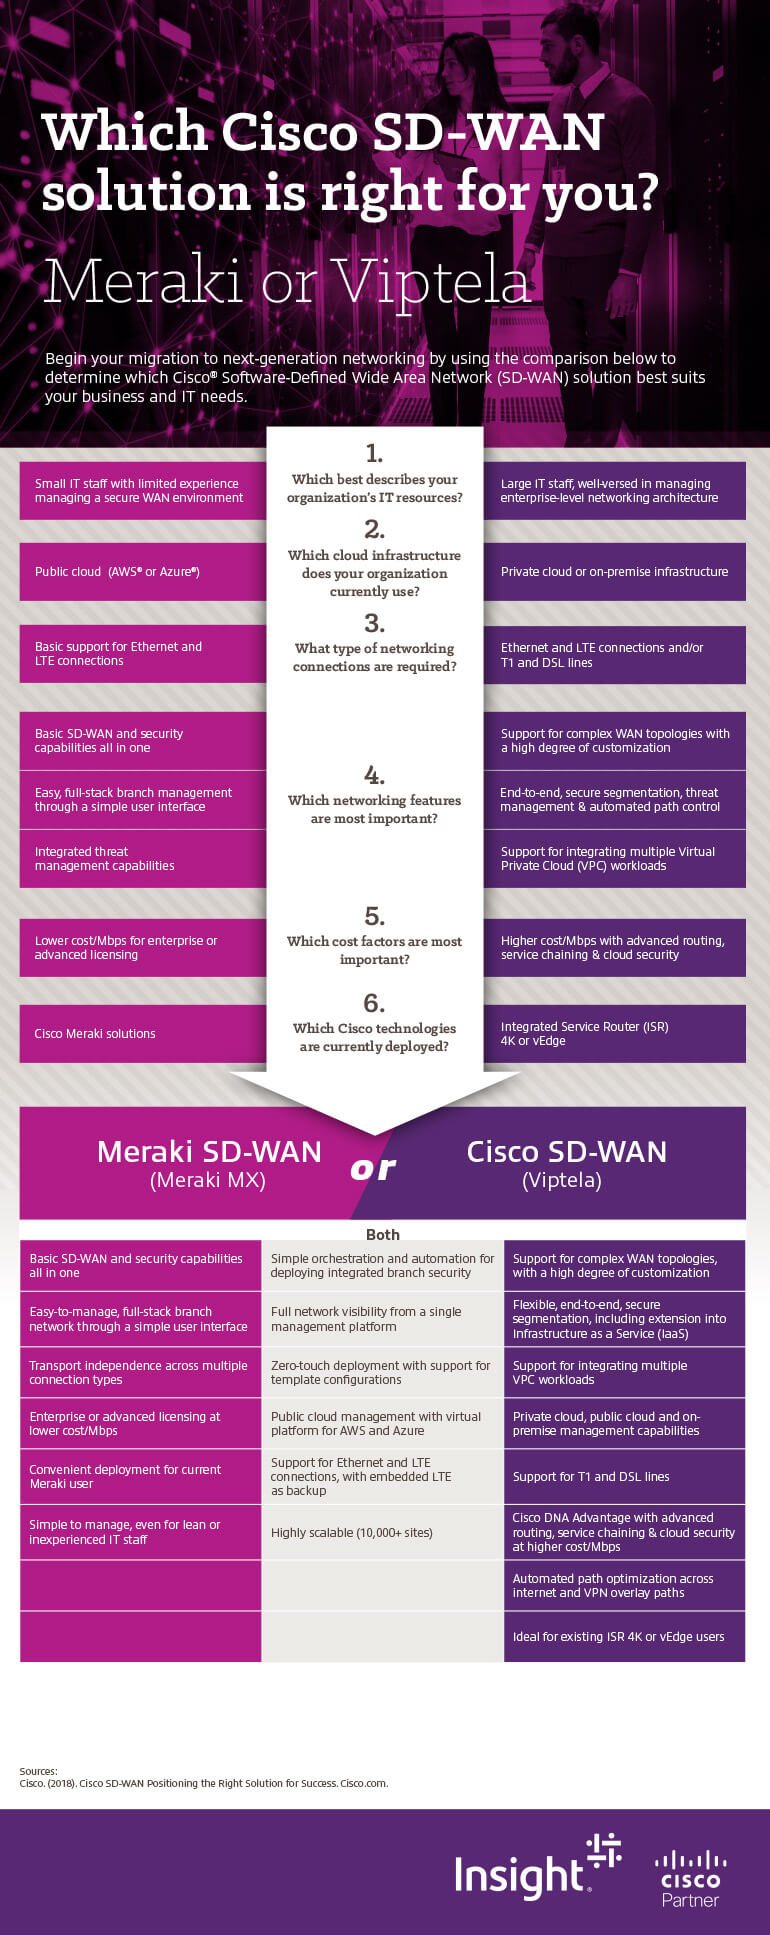 Which Cisco SD-WAN solution is right for you? infographic. Meraki SD-WAN or Cisco SD-WAN